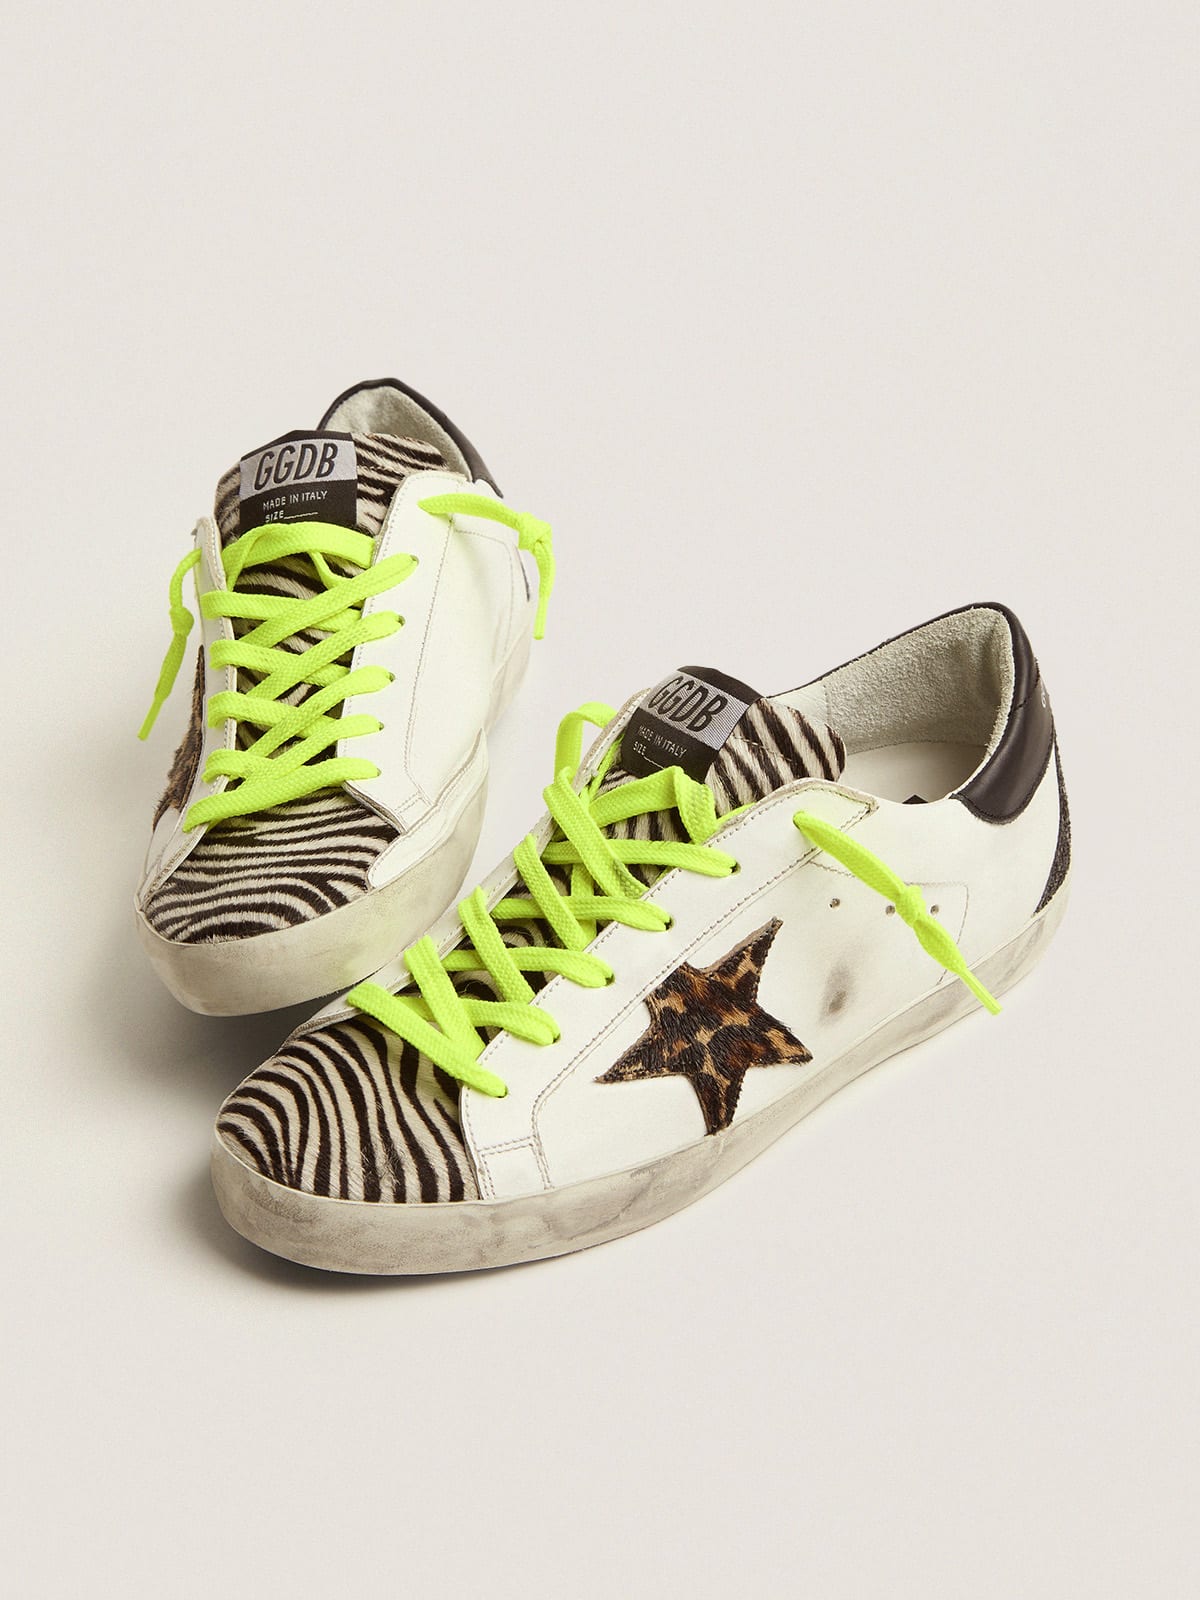 Super-Star LTD sneakers with animal-print pony skin tongue and star |  Golden Goose